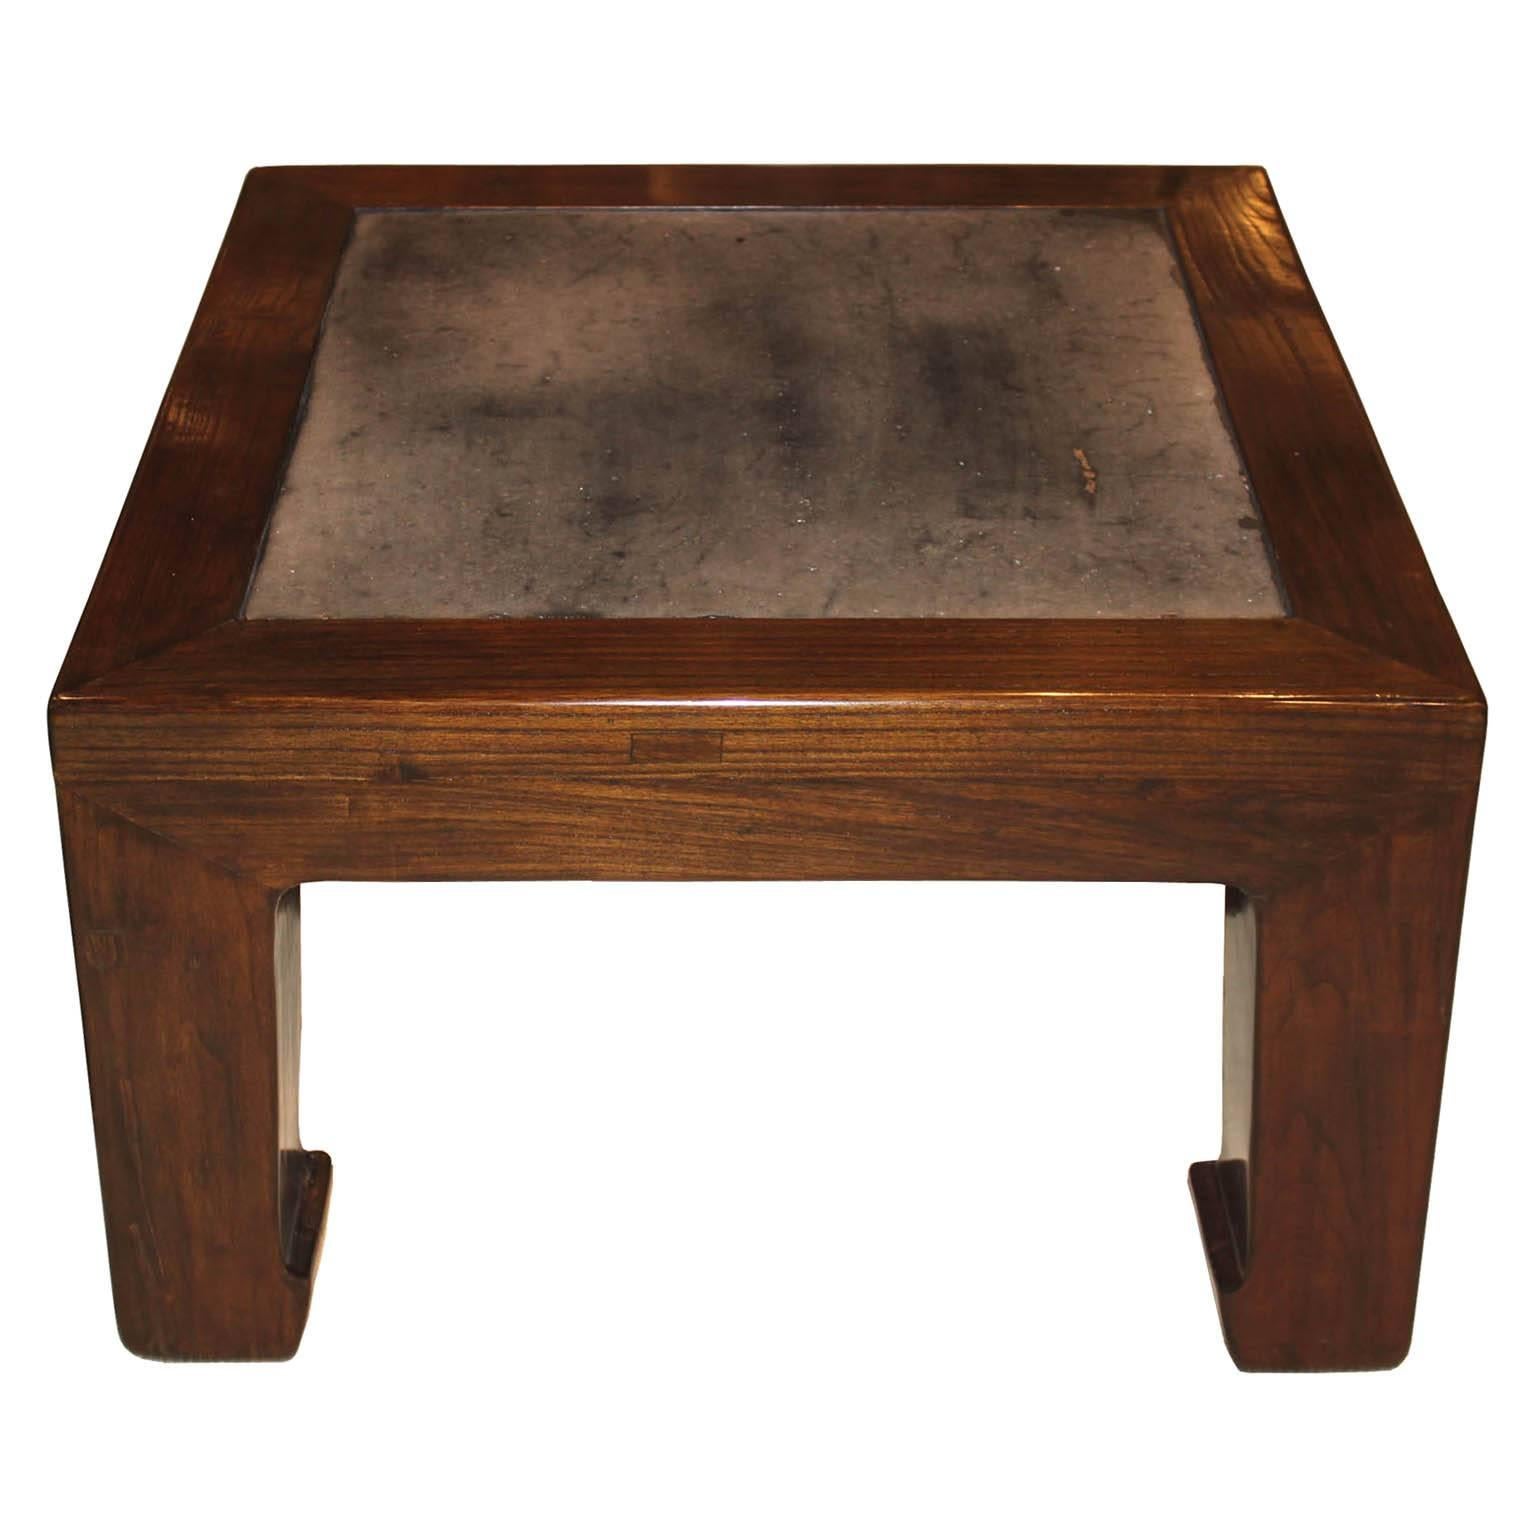 Chinese elm wood coffee table with vintage stone insert can be used in a contemporary home.